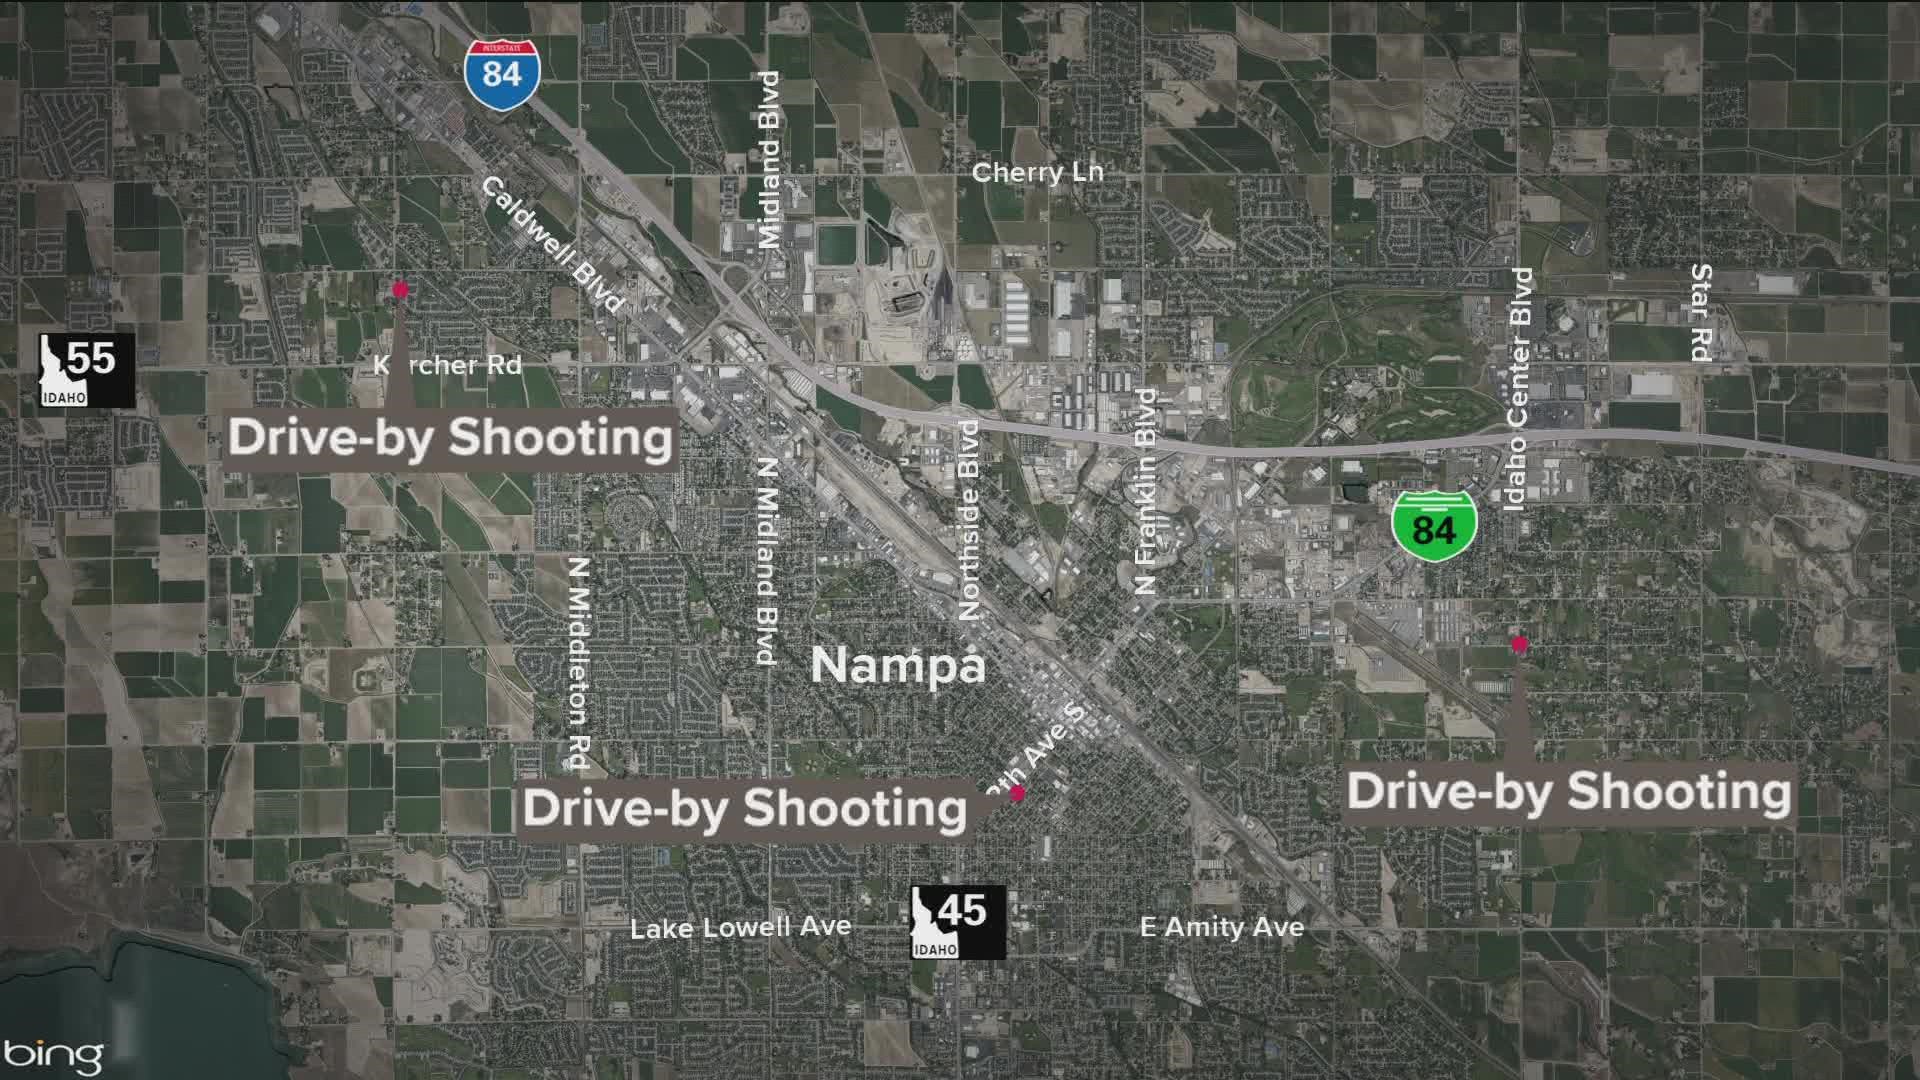 Nampa Police believe additional drive-by shootings and an aggravated assault are related to the Sept. 1 homicide near Buffalo Wild Wings.